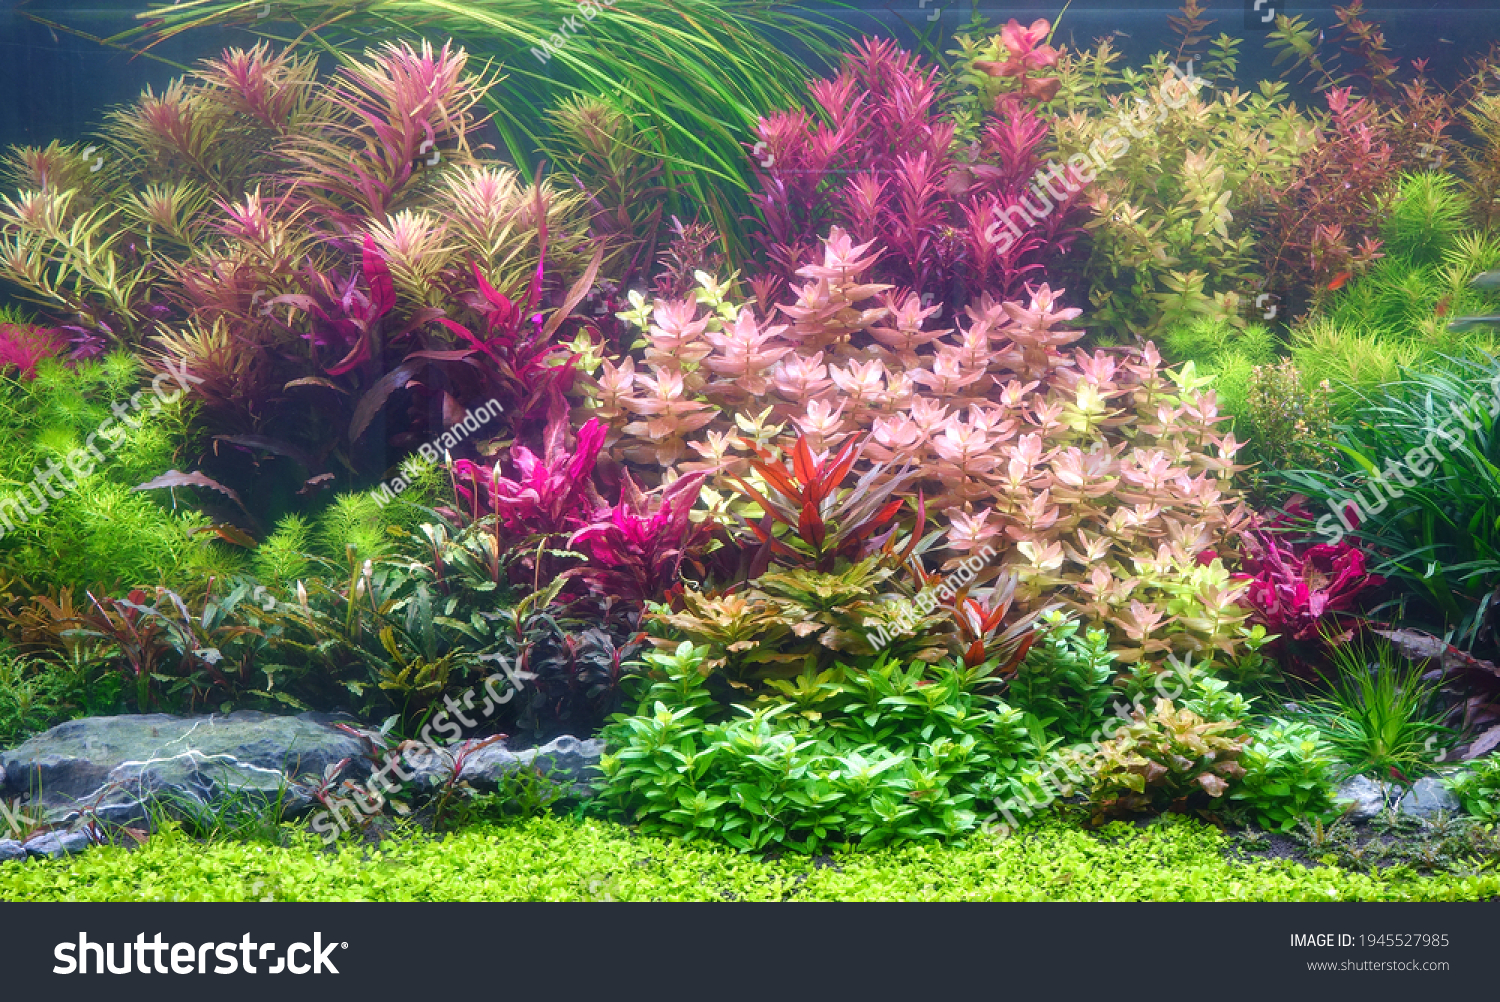 Colorful aquatic plants in aquarium tank with Nature and Dutch style aquascaping layout #1945527985